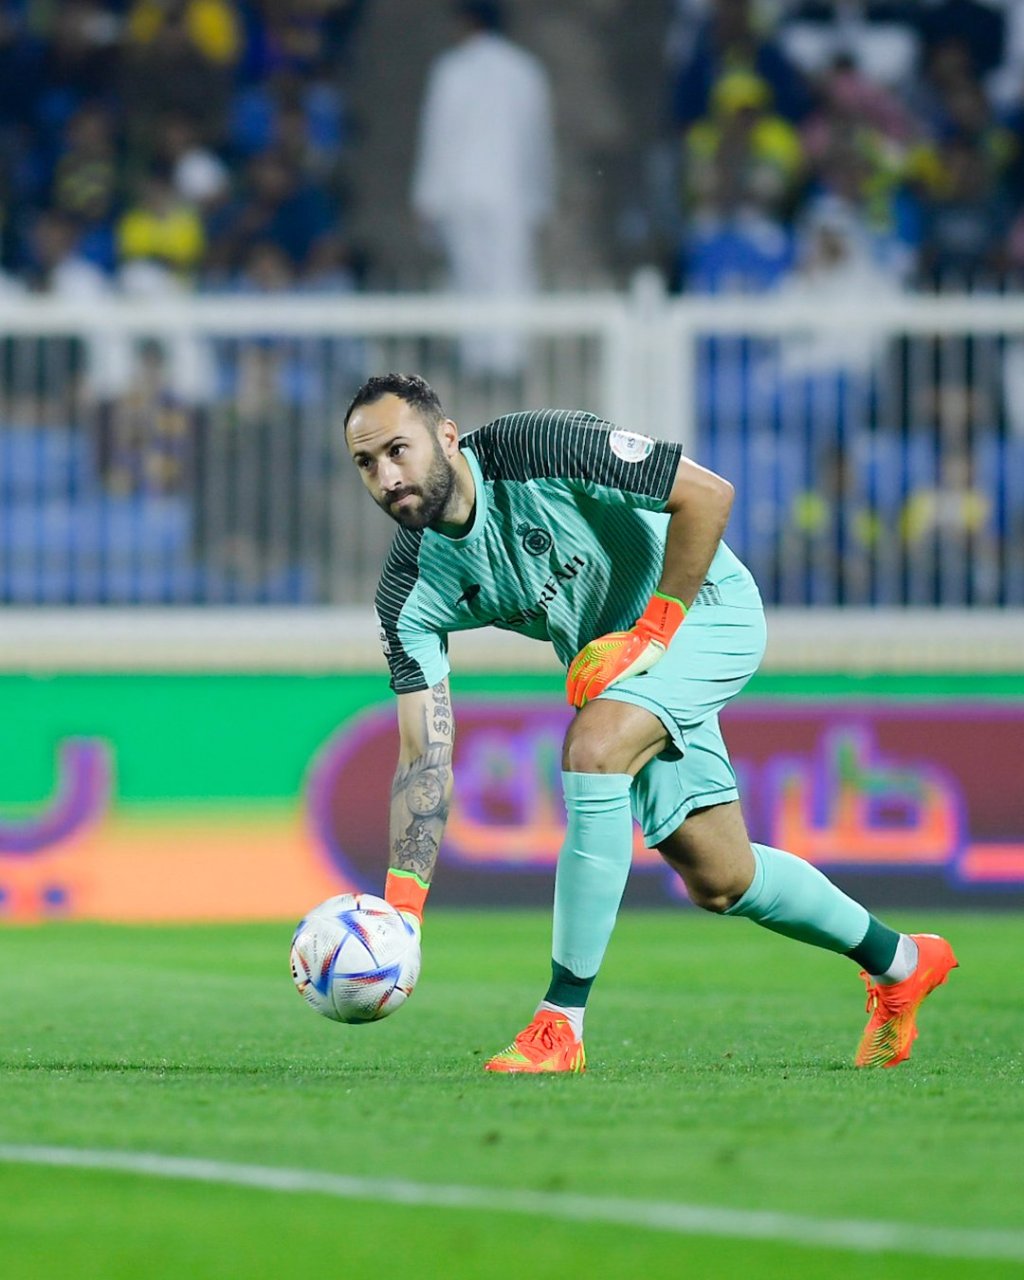 David Ospina rewarded with major prize in Saudi Pro League